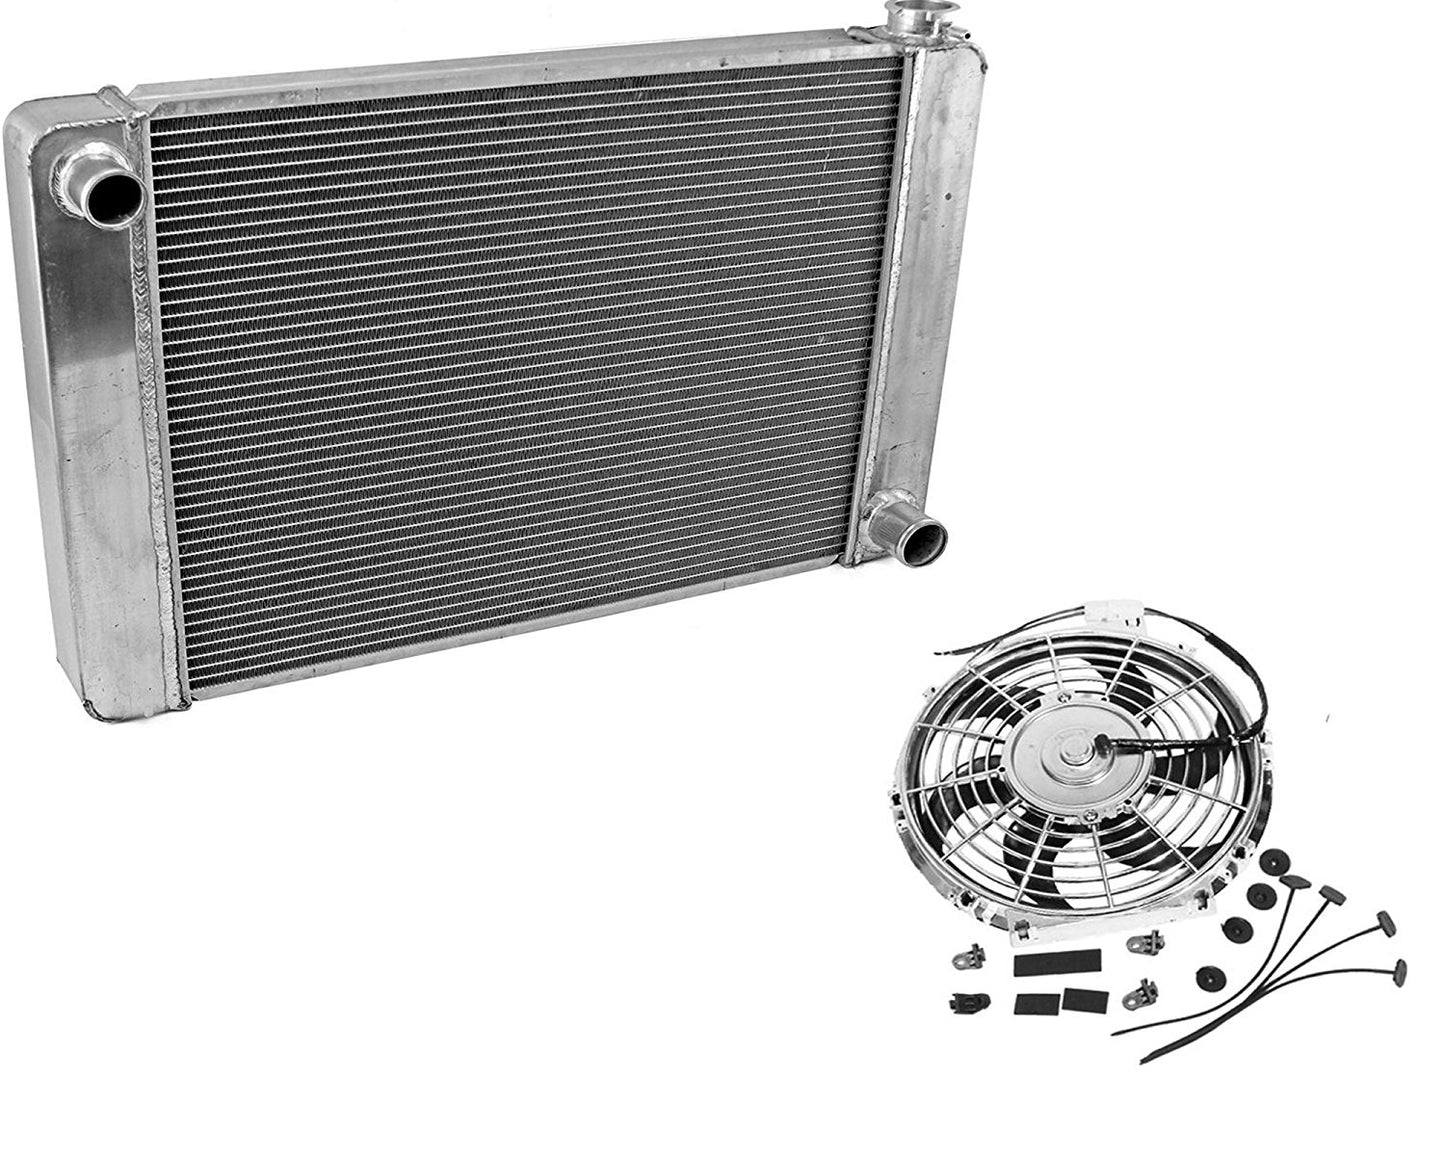 For SBC BBC Chevy GM Fabricated Aluminum Radiator 22" x 19" x3" Overall & 10" Chrome Electric Curved Blade Cooling Fan